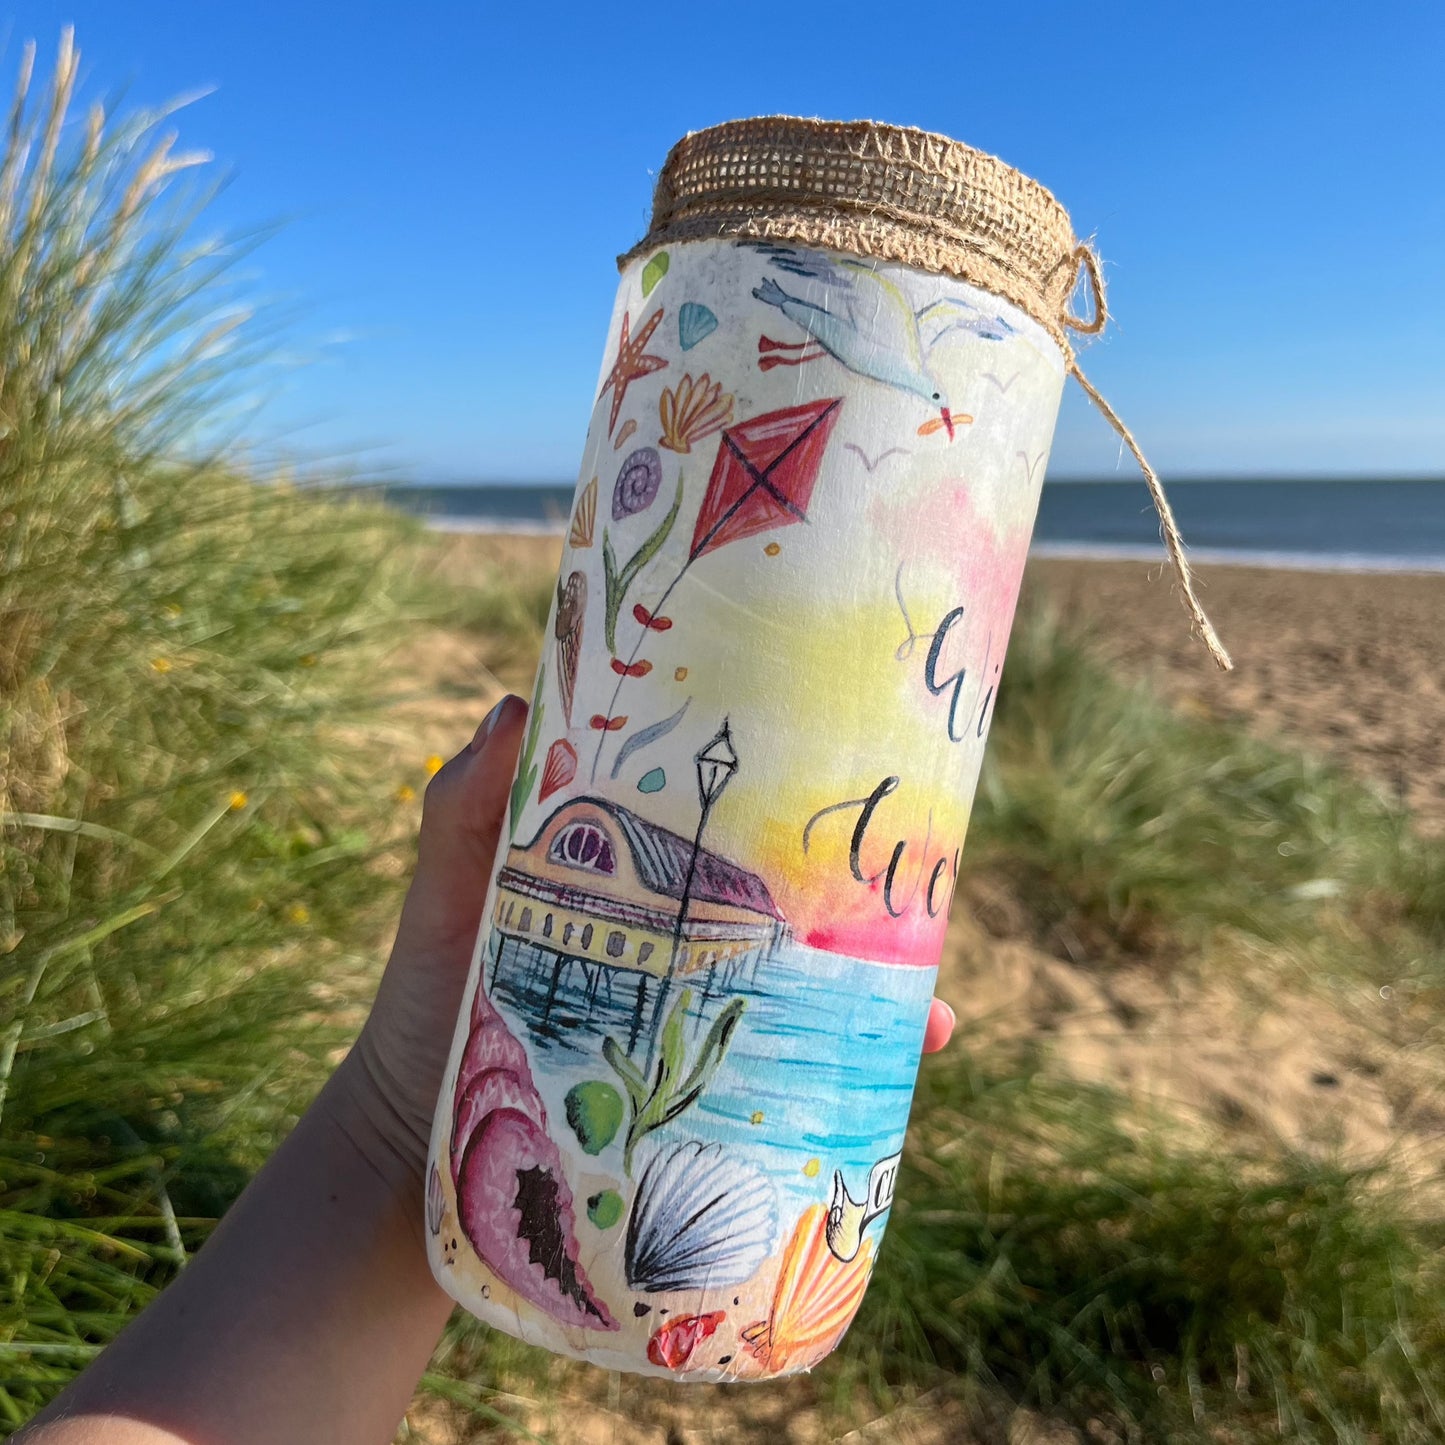 A decoupaged jar on Cleethorpes beach featuring watercolour artwork by local artist, Eve Leoni Smith. 